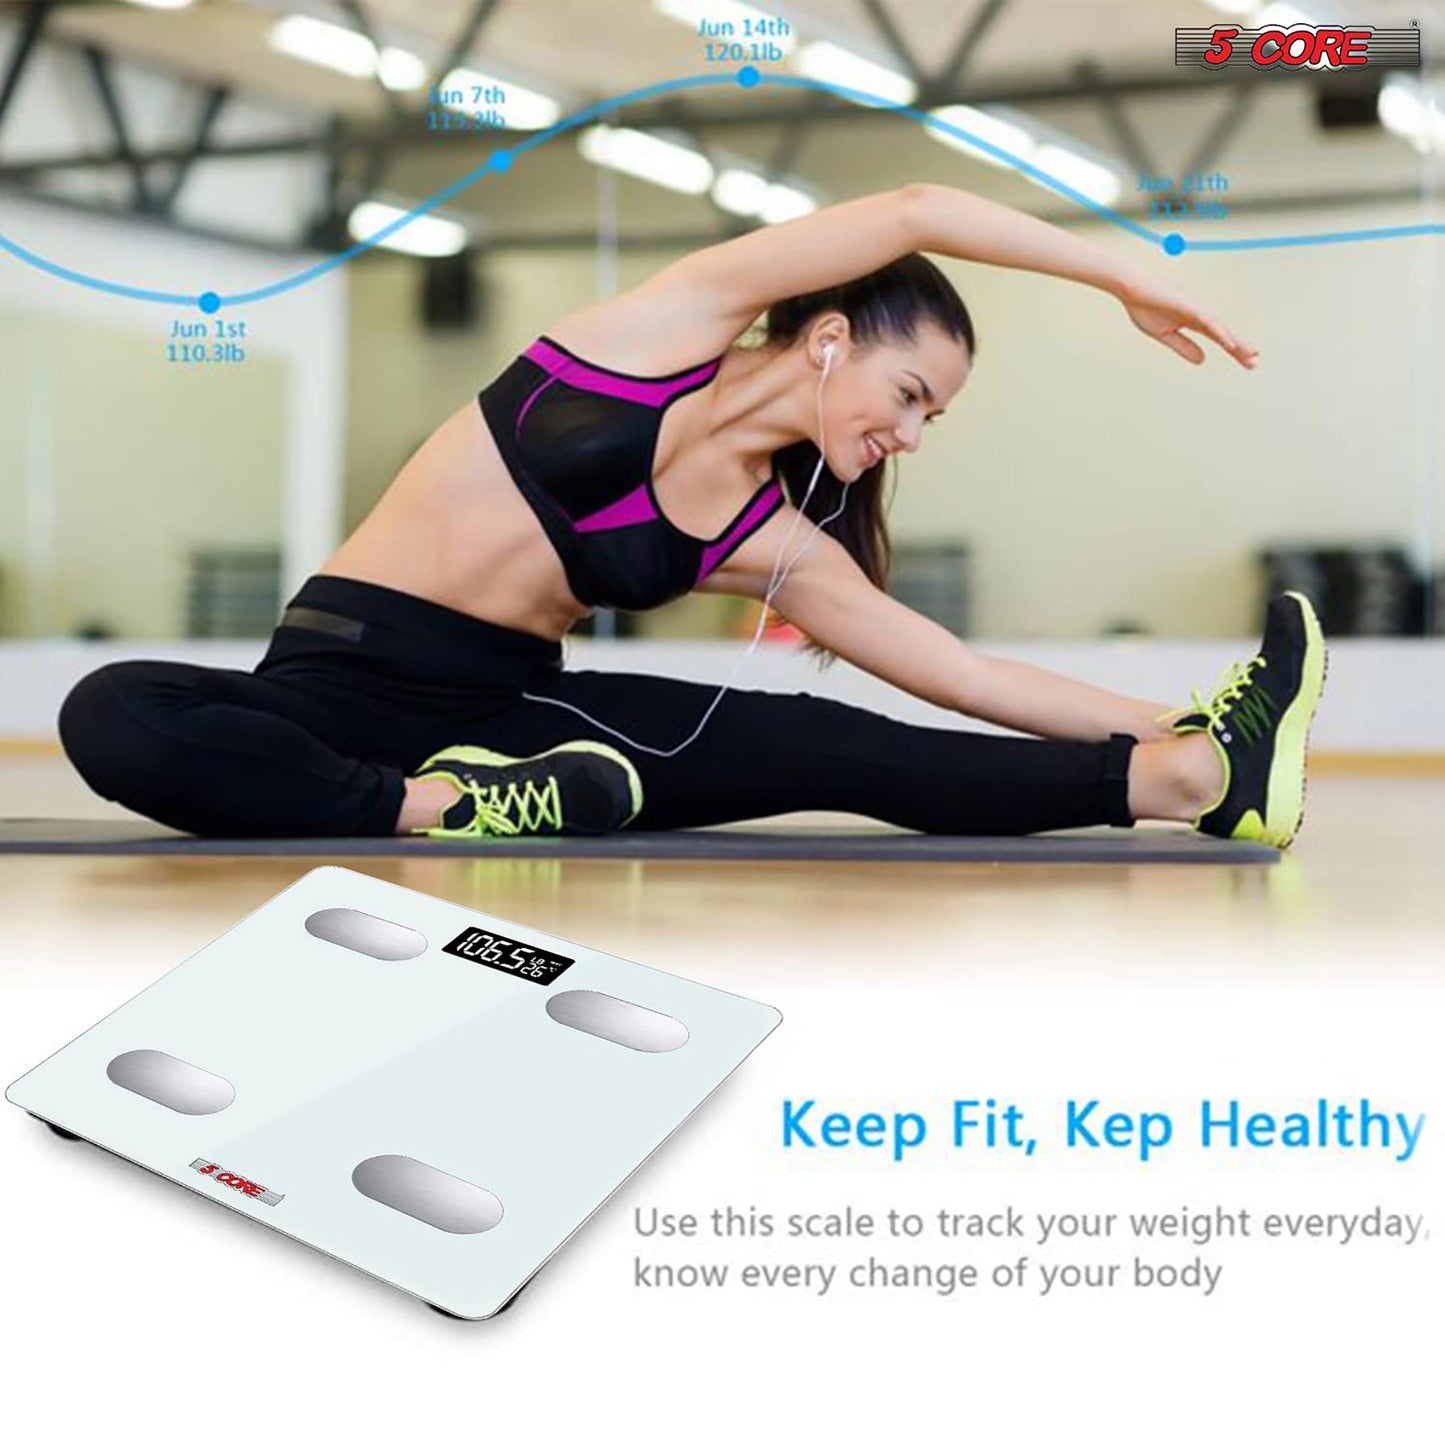 Kcubeinc Rechargeable Smart Digital Bathroom Weighing Scale with Body Fat and Water Weight for People, Bluetooth BMI Electronic Body Analyzer Machine, 400 lbs. BBS HL R WH